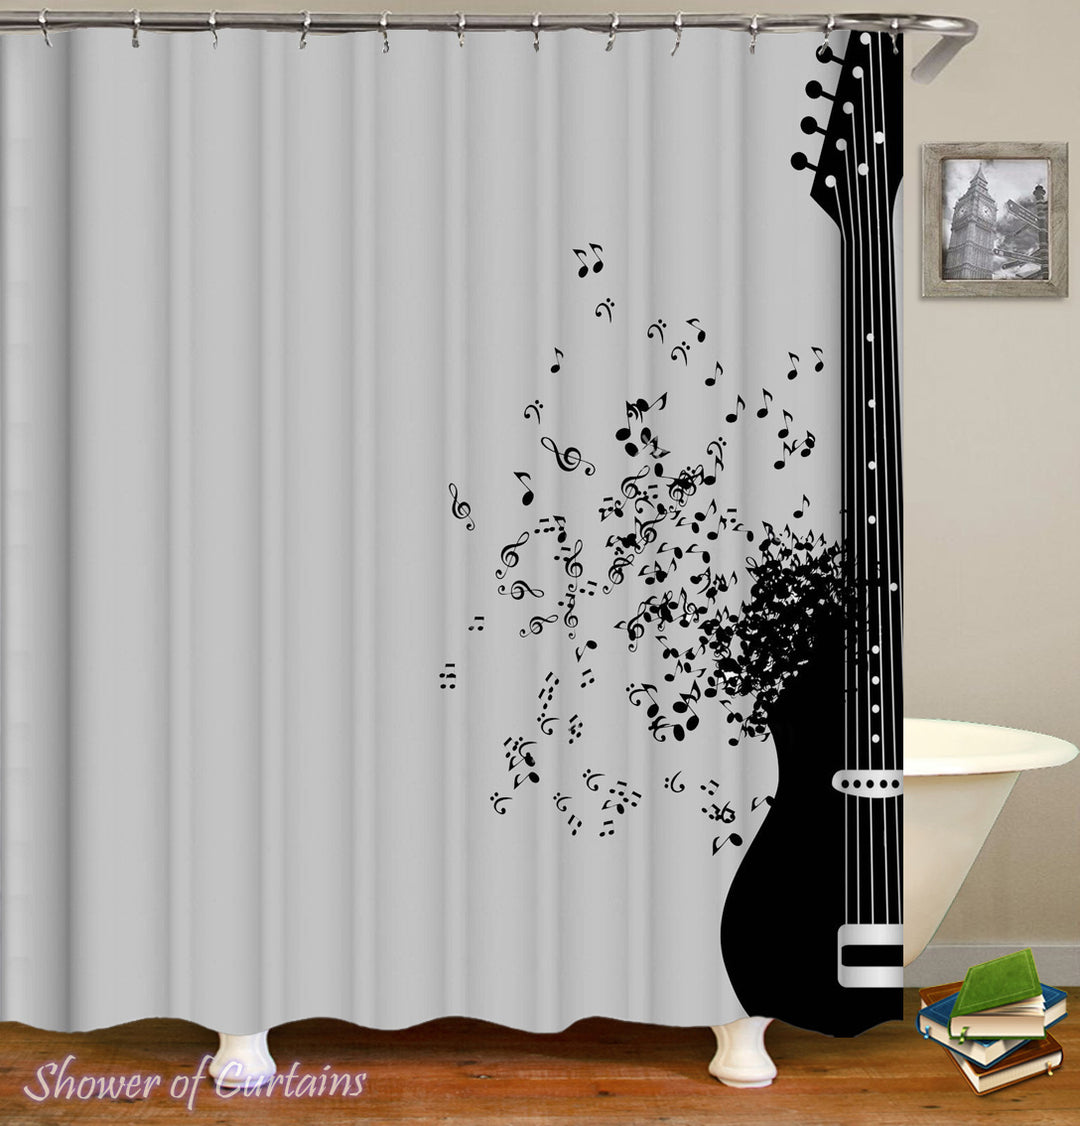 Black and White shower curtains- Guitar Is Life